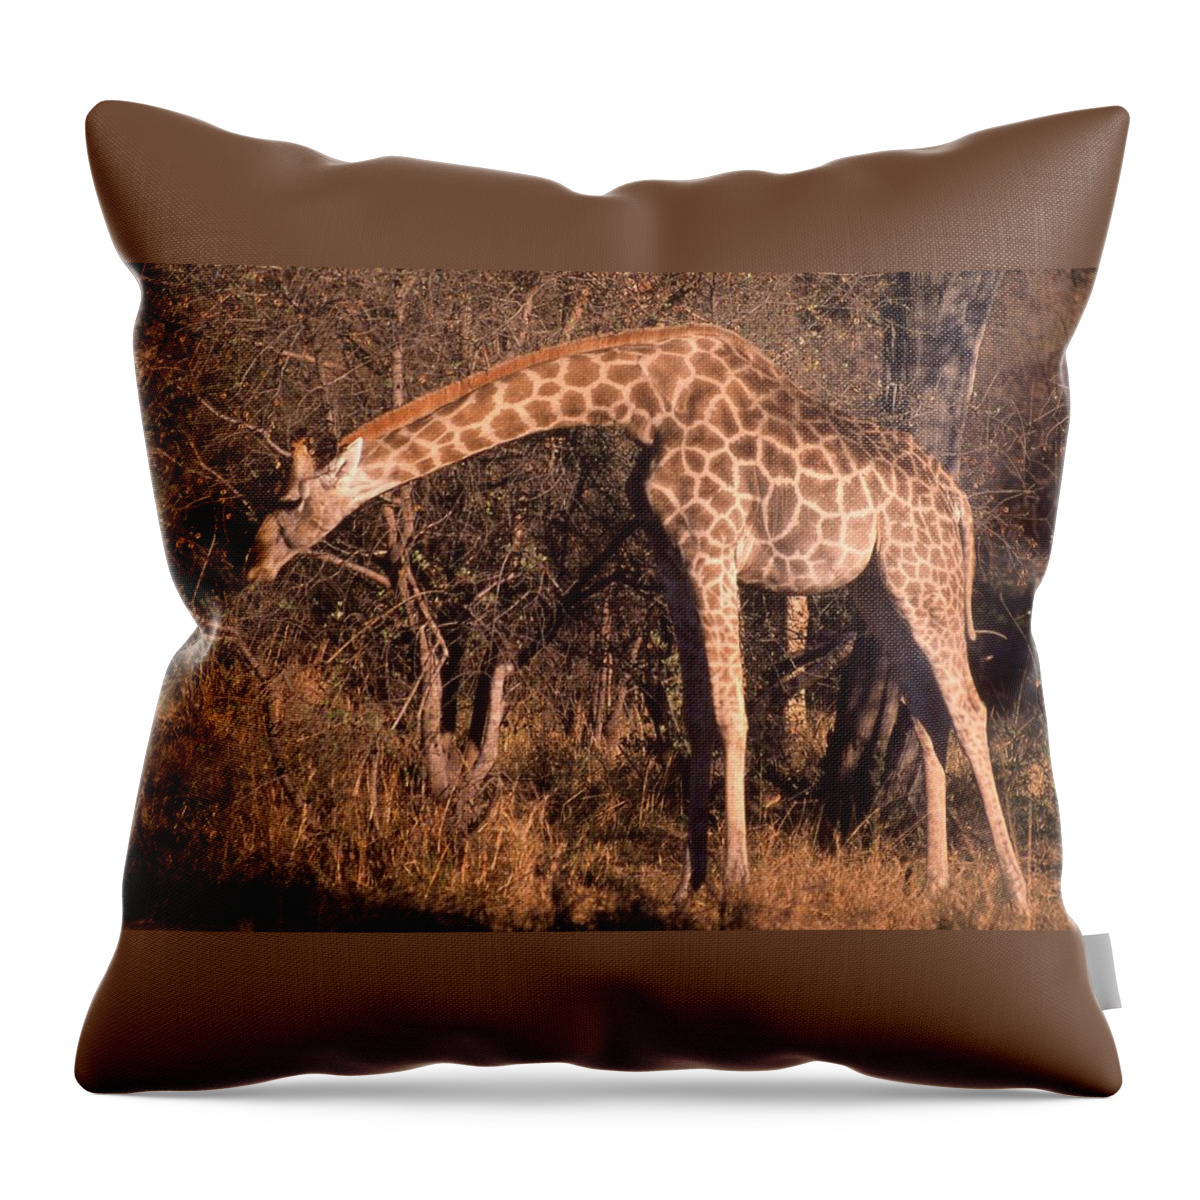 Africa Throw Pillow featuring the photograph Giraffe Eating Too by Russel Considine